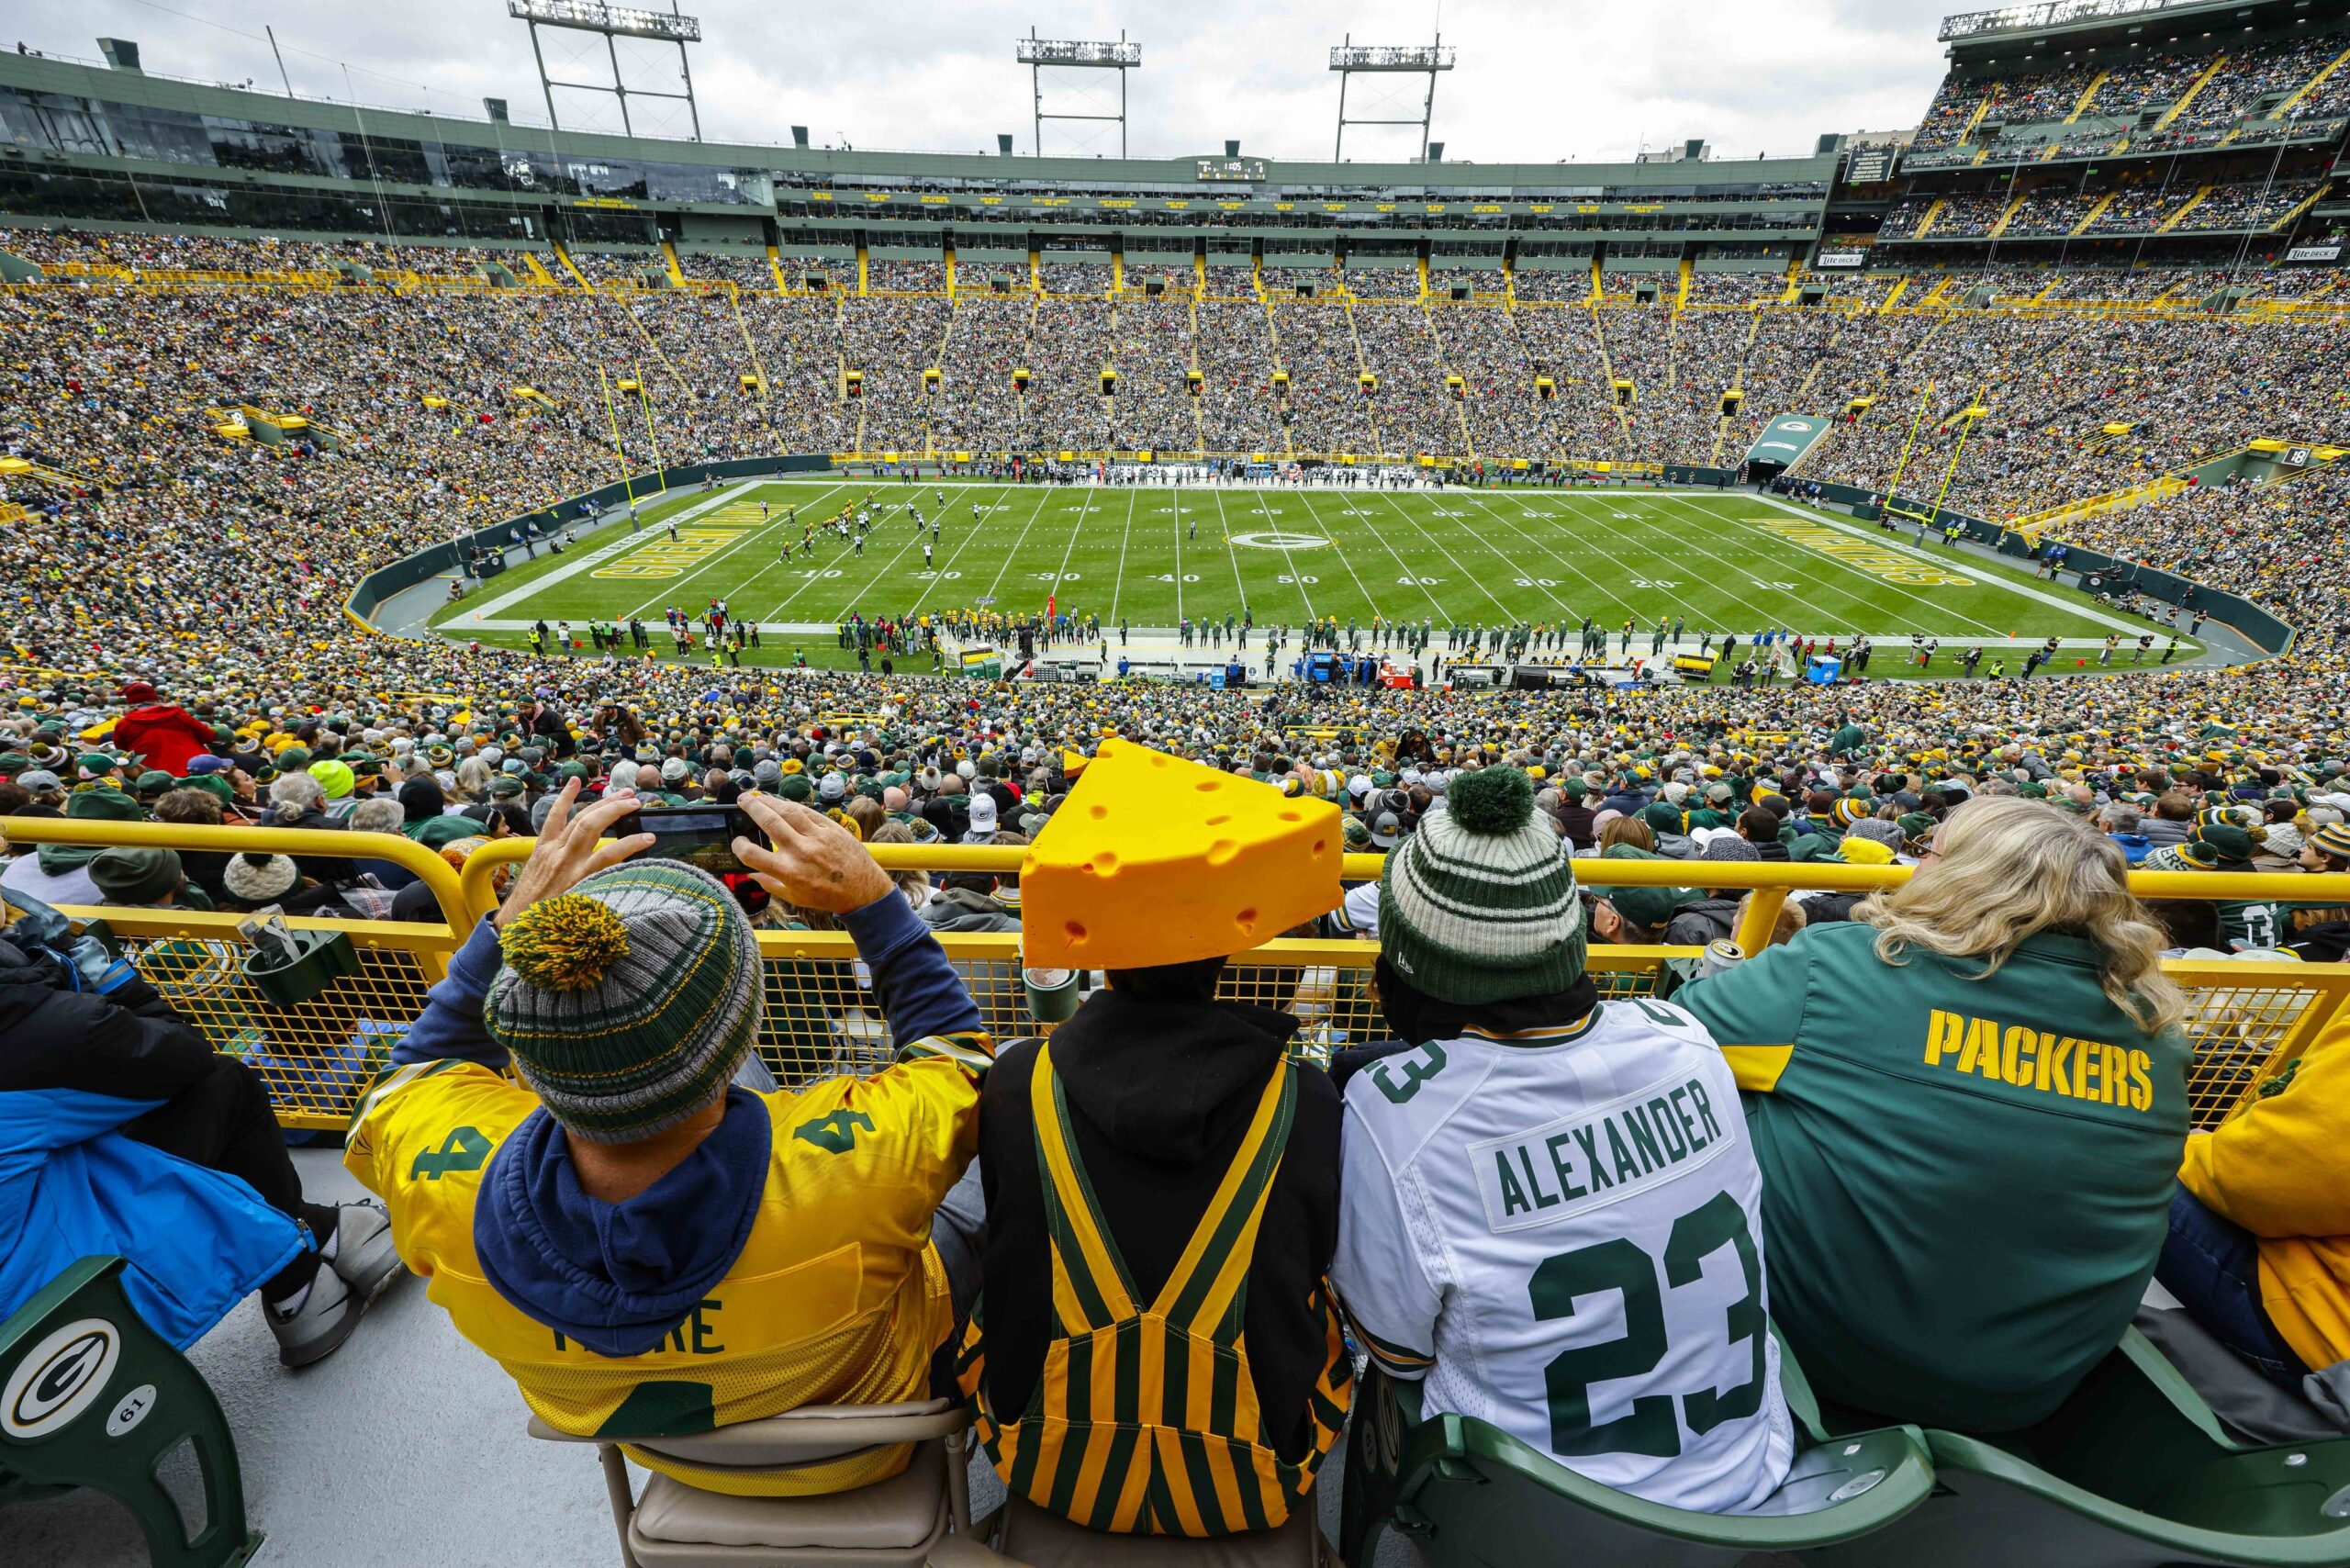 Lambeau Field in Green Bay, Wis., during an NFL game